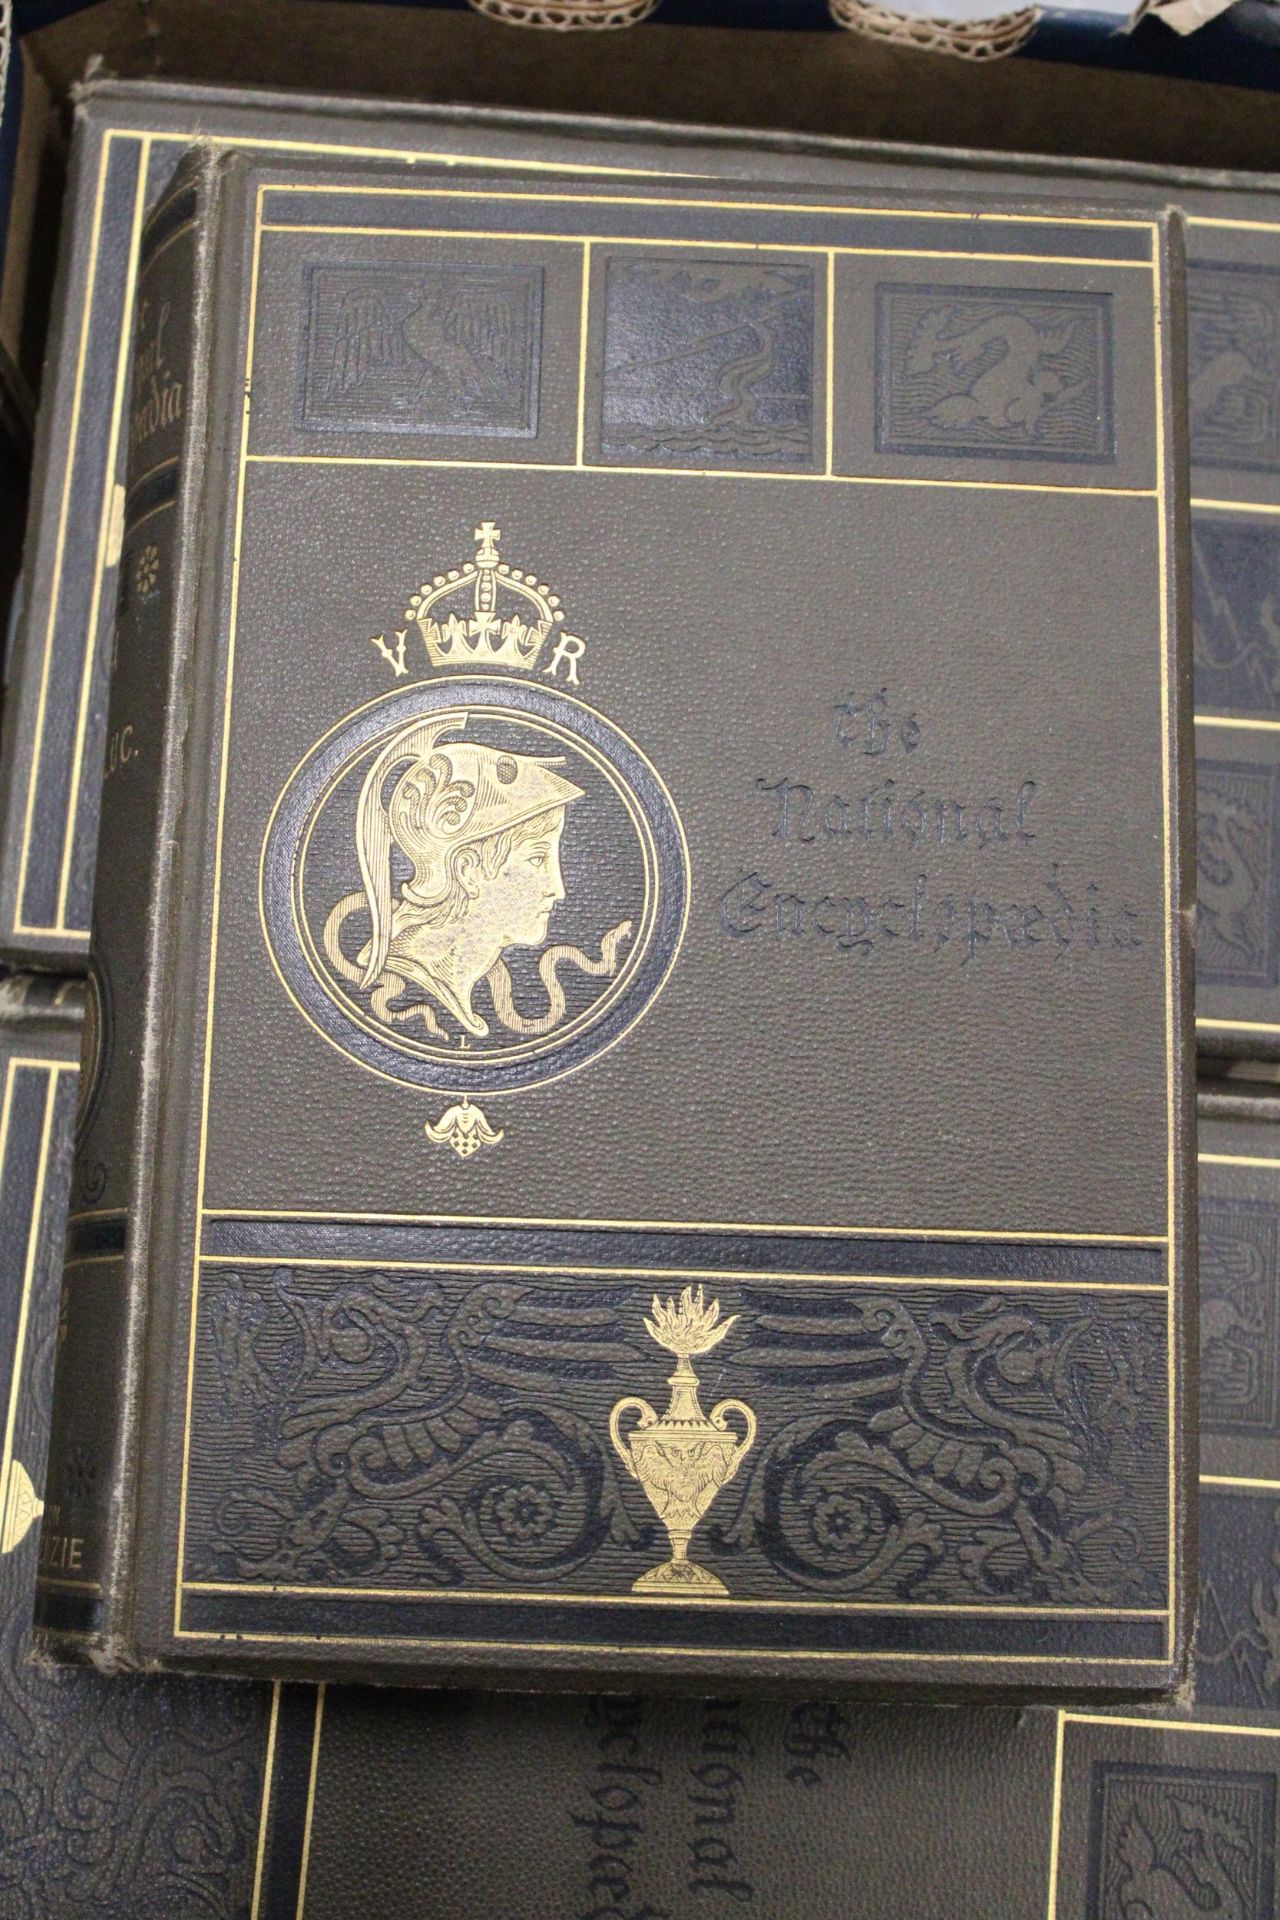 FIVE VOLUMES OF 'THE NATIONAL ENCYCLOPEDIA' - Image 2 of 5